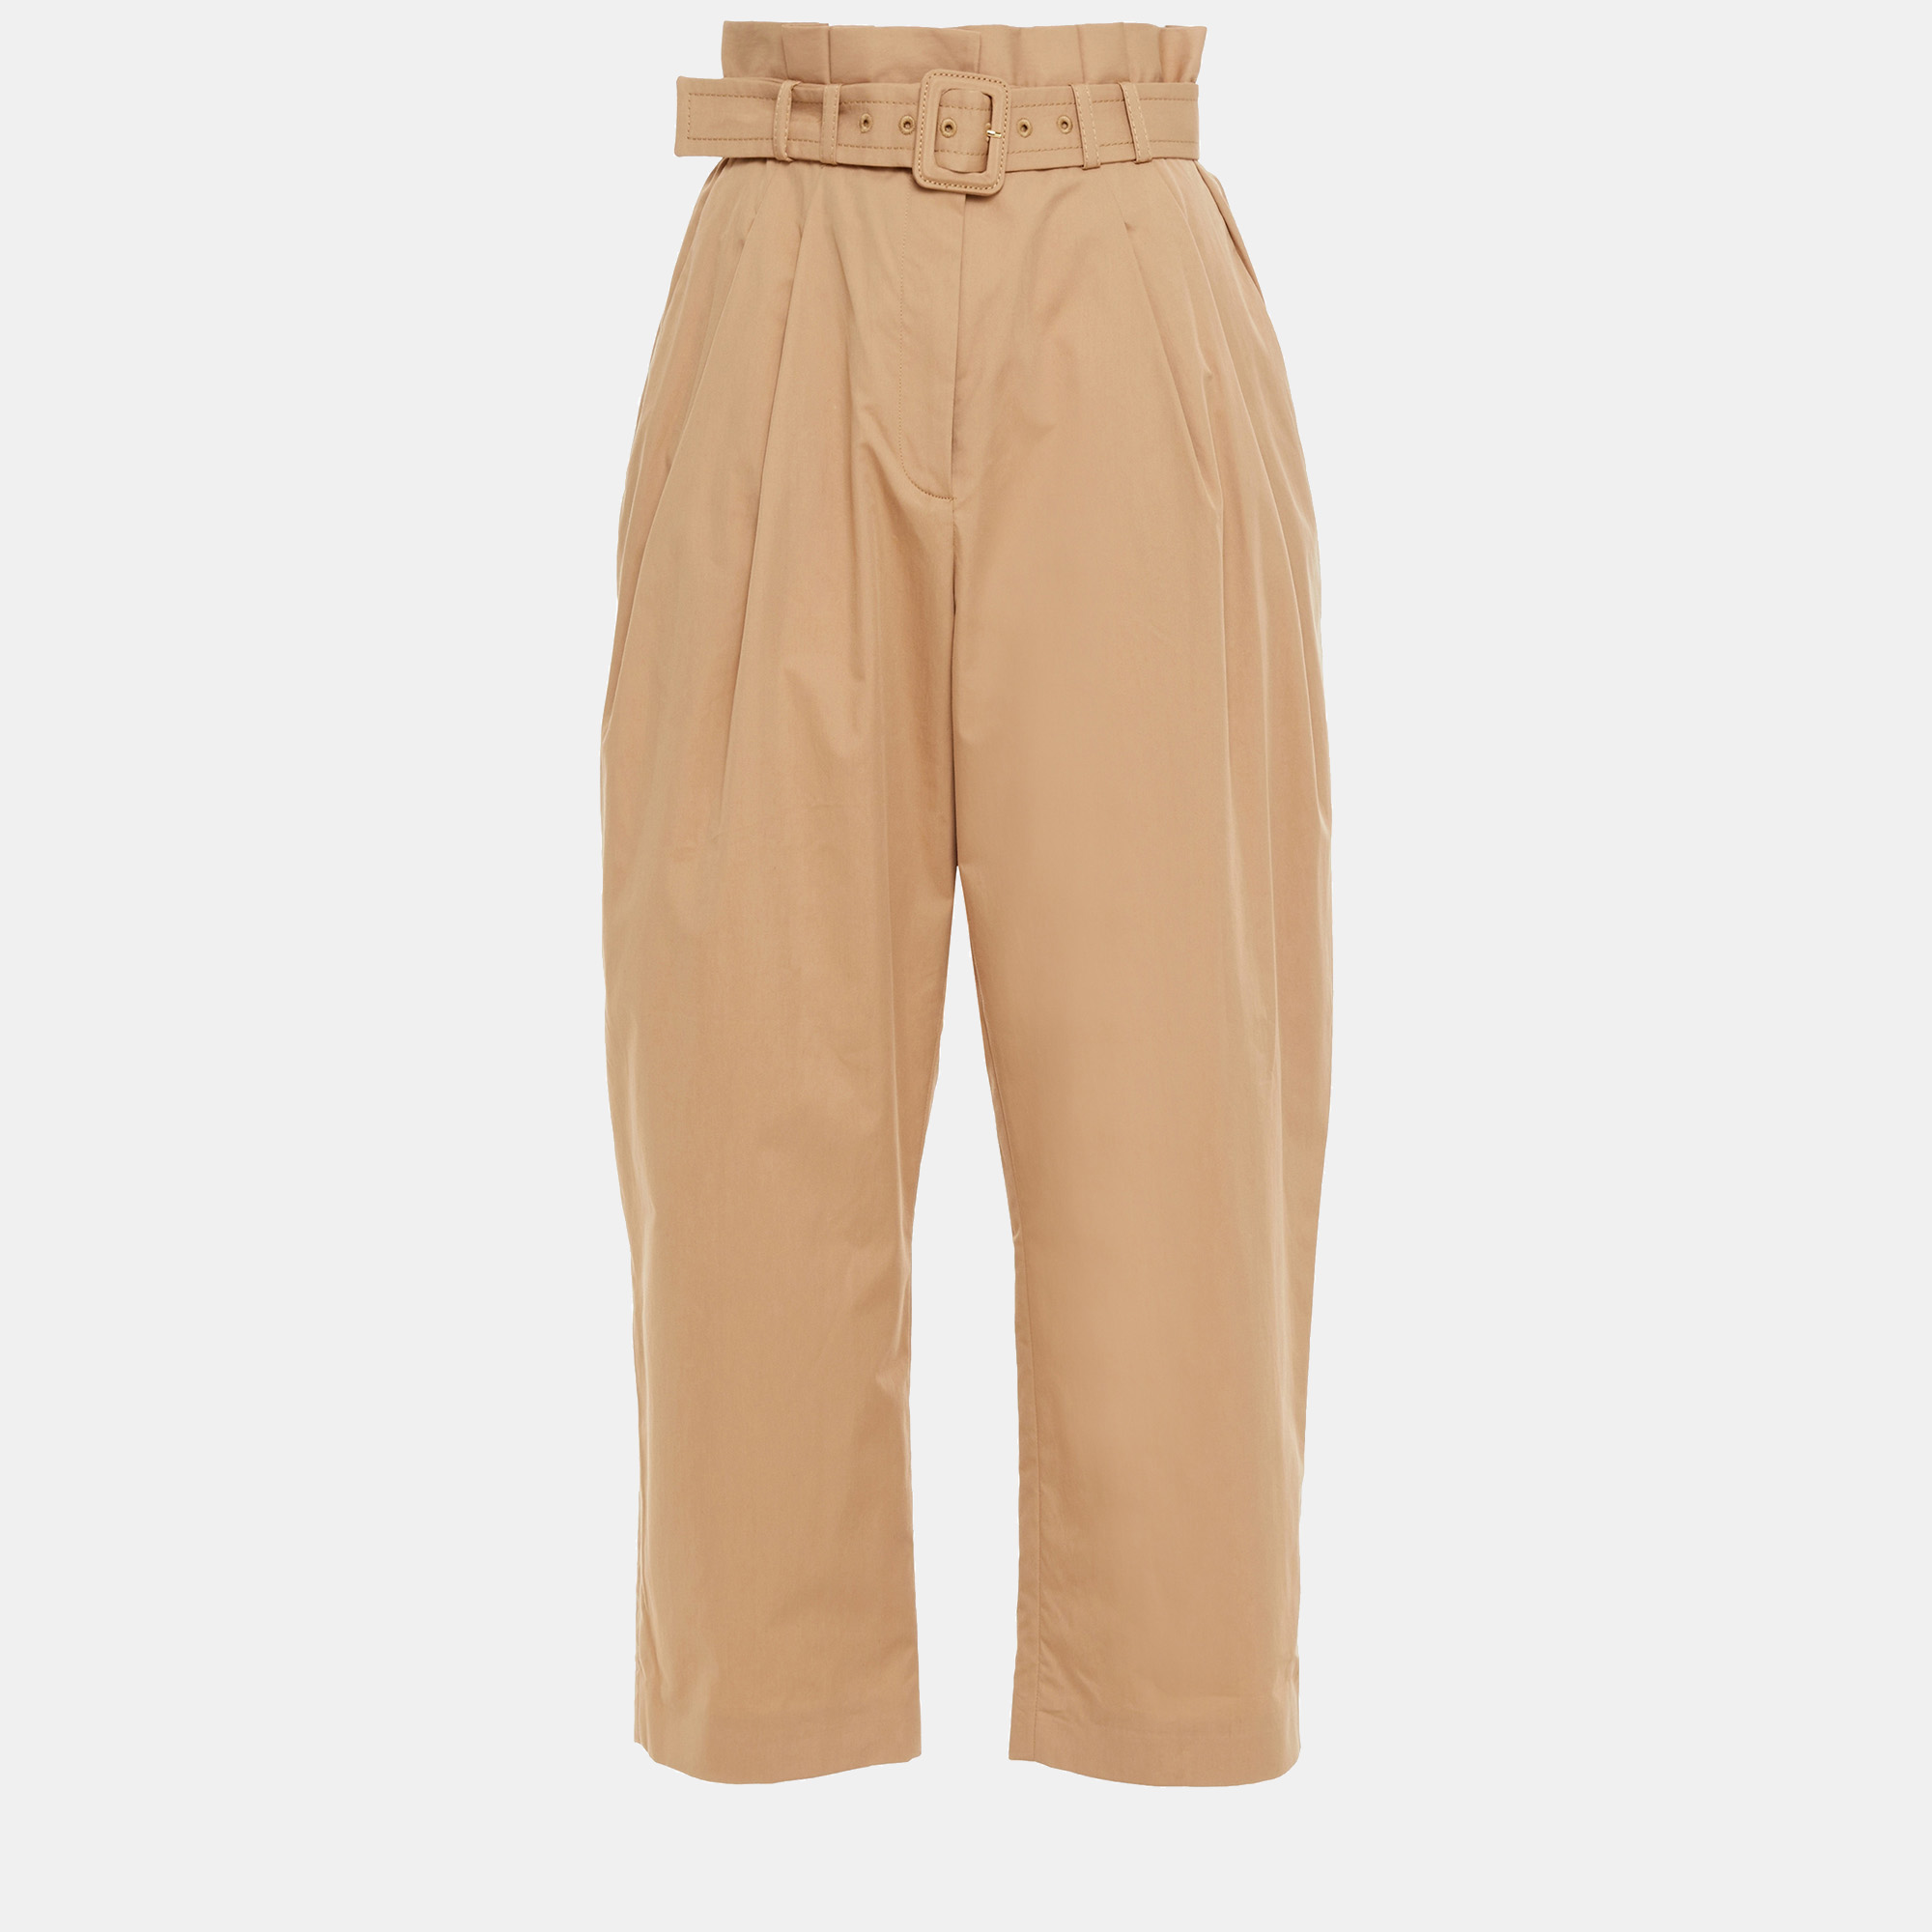 Zimmermann cotton tapered pants 0